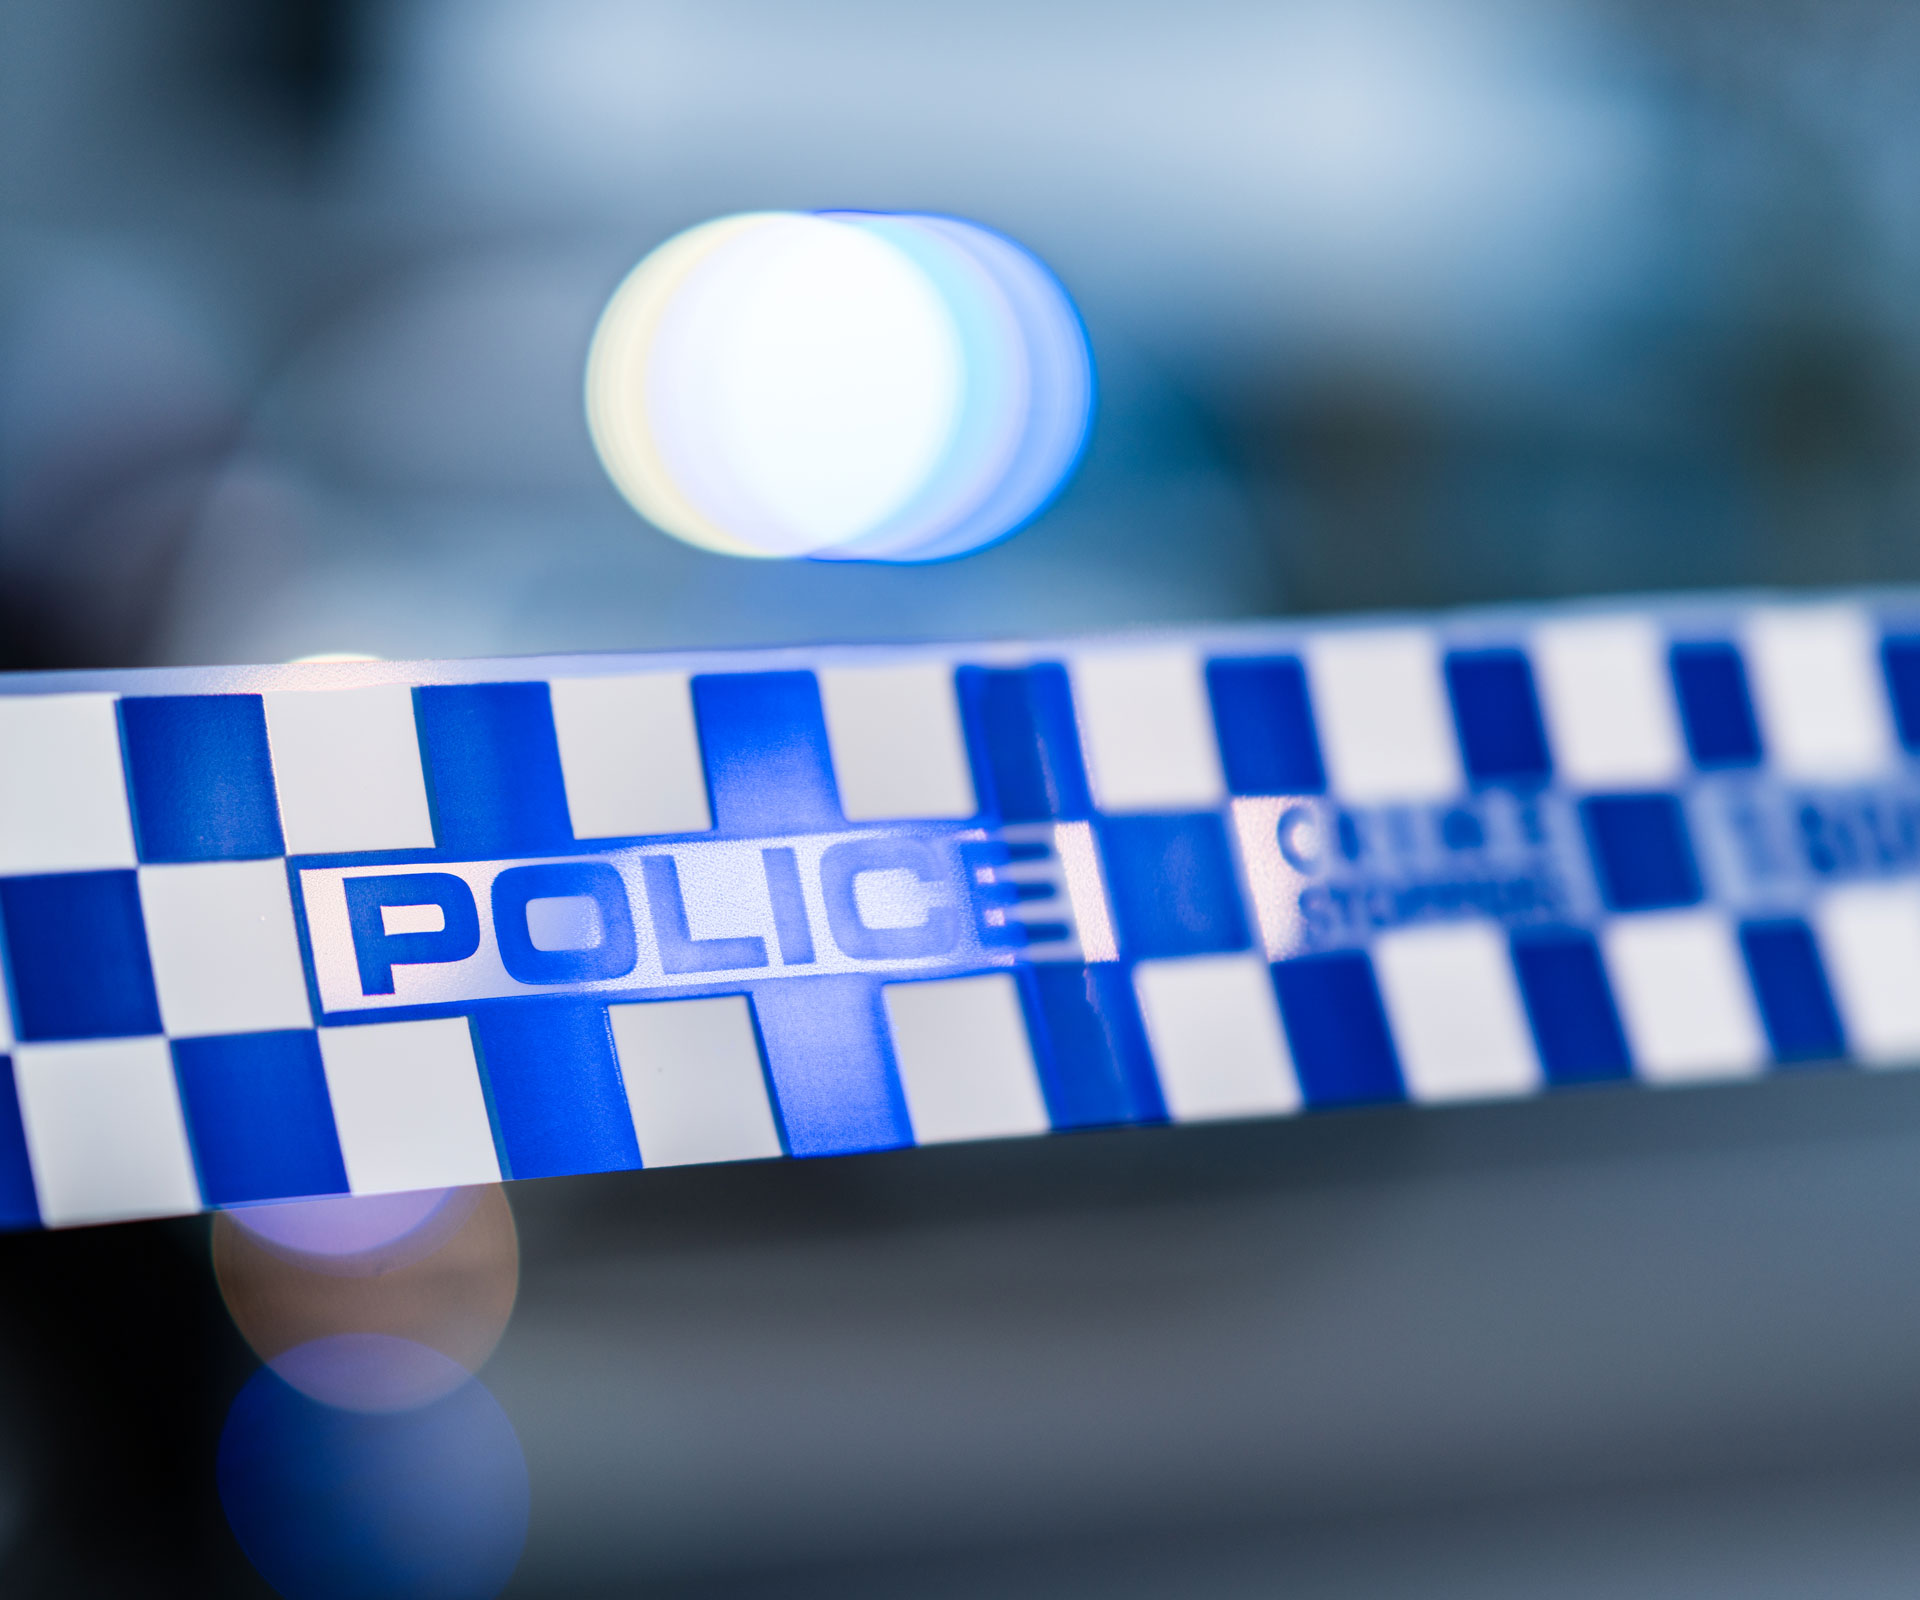 Man charged with child abduction after sleeping girl, 12, taken from her bed in Queensland